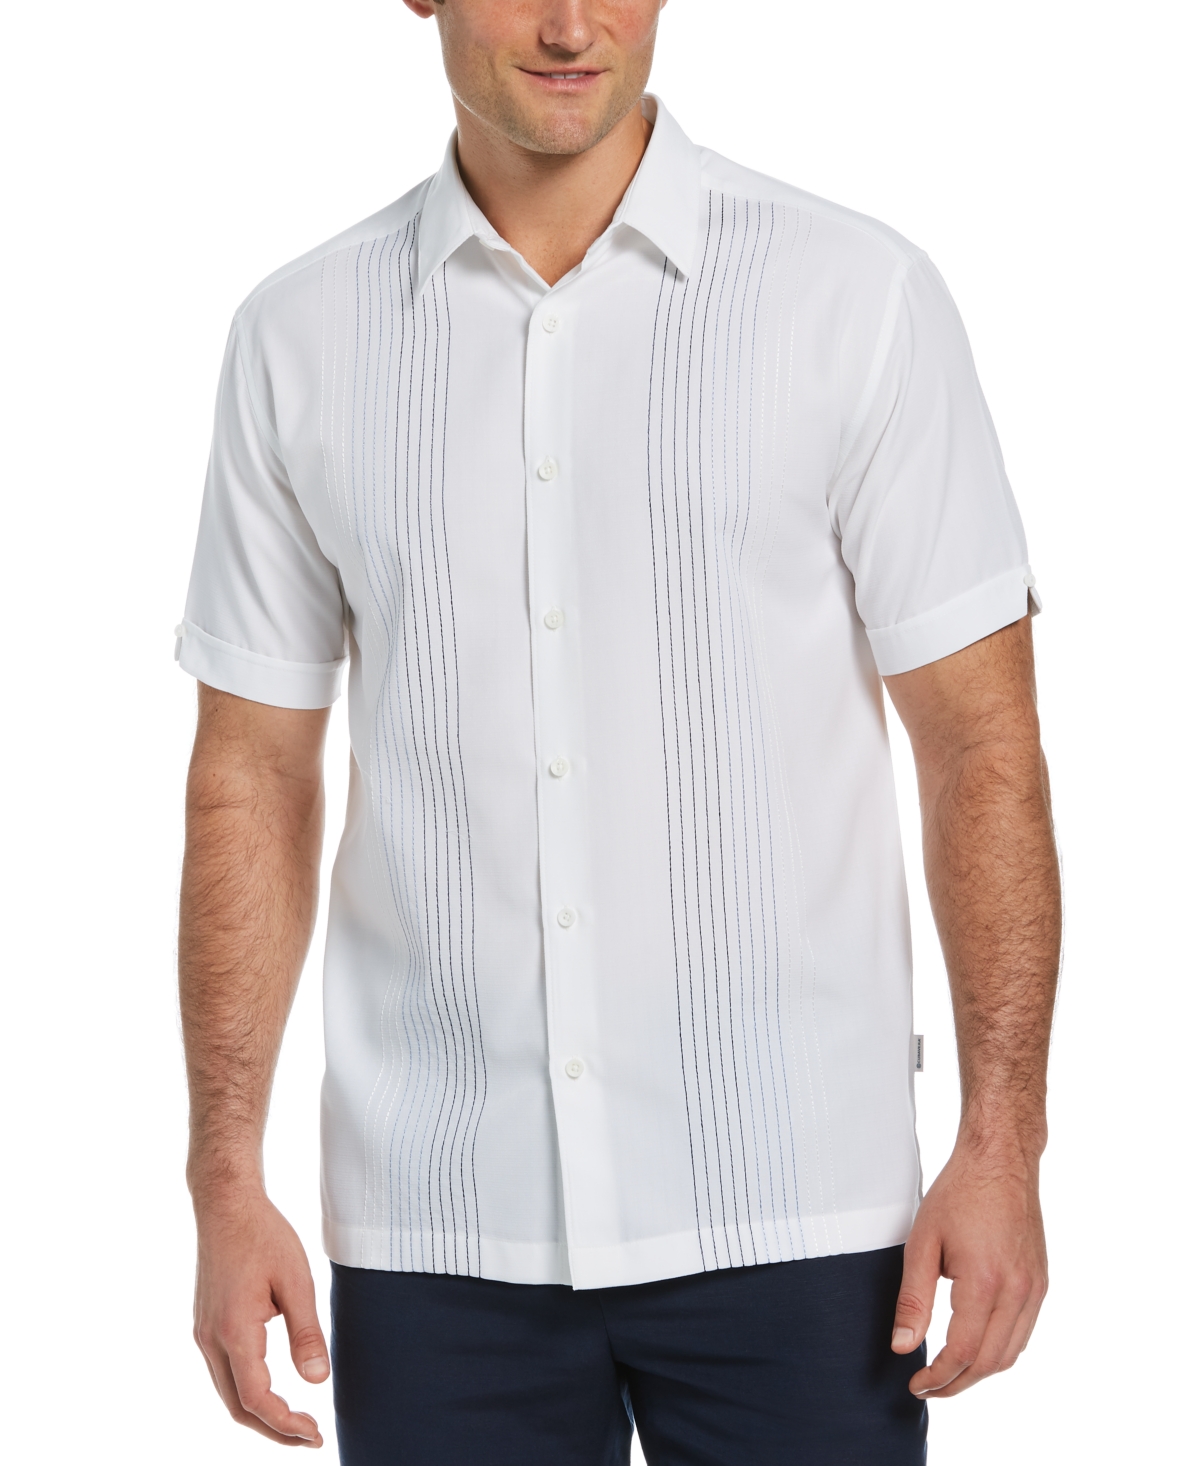 Men's Big & Tall Ombre Embroidered Stripe Short Sleeve Shirt - Brilliant White